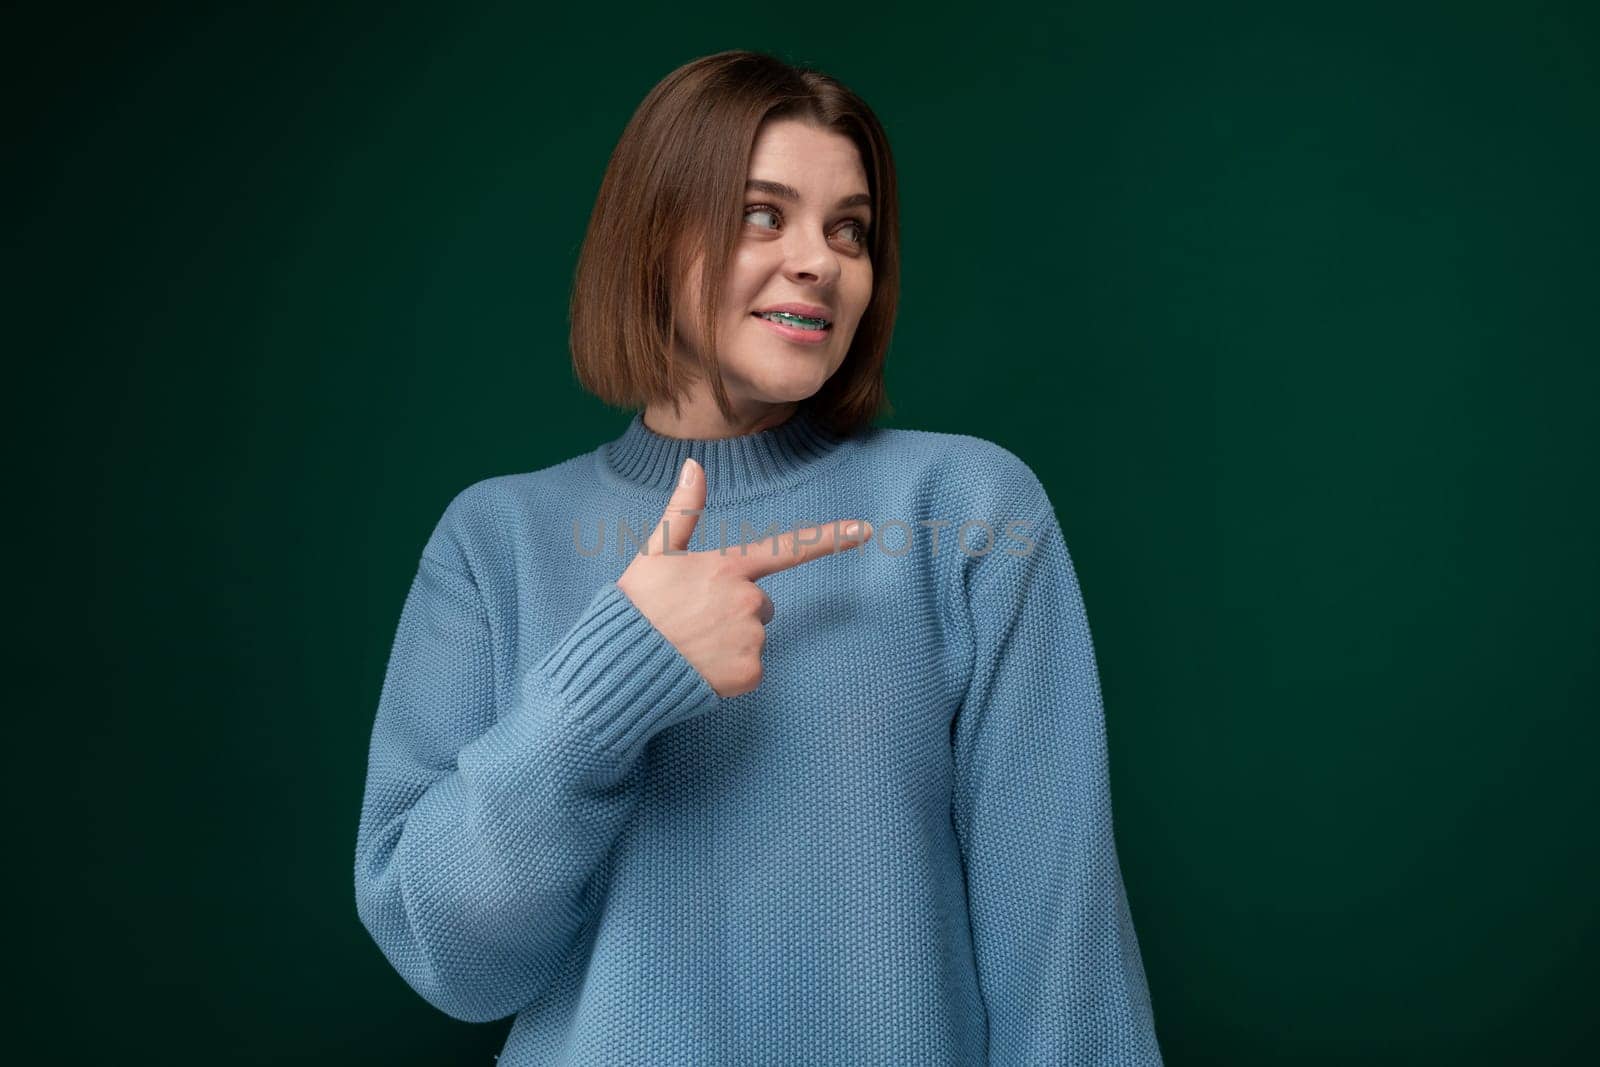 A woman wearing a blue sweater is pointing at an unseen object or direction. She appears focused and engaged in the action of pointing with her arm extended.